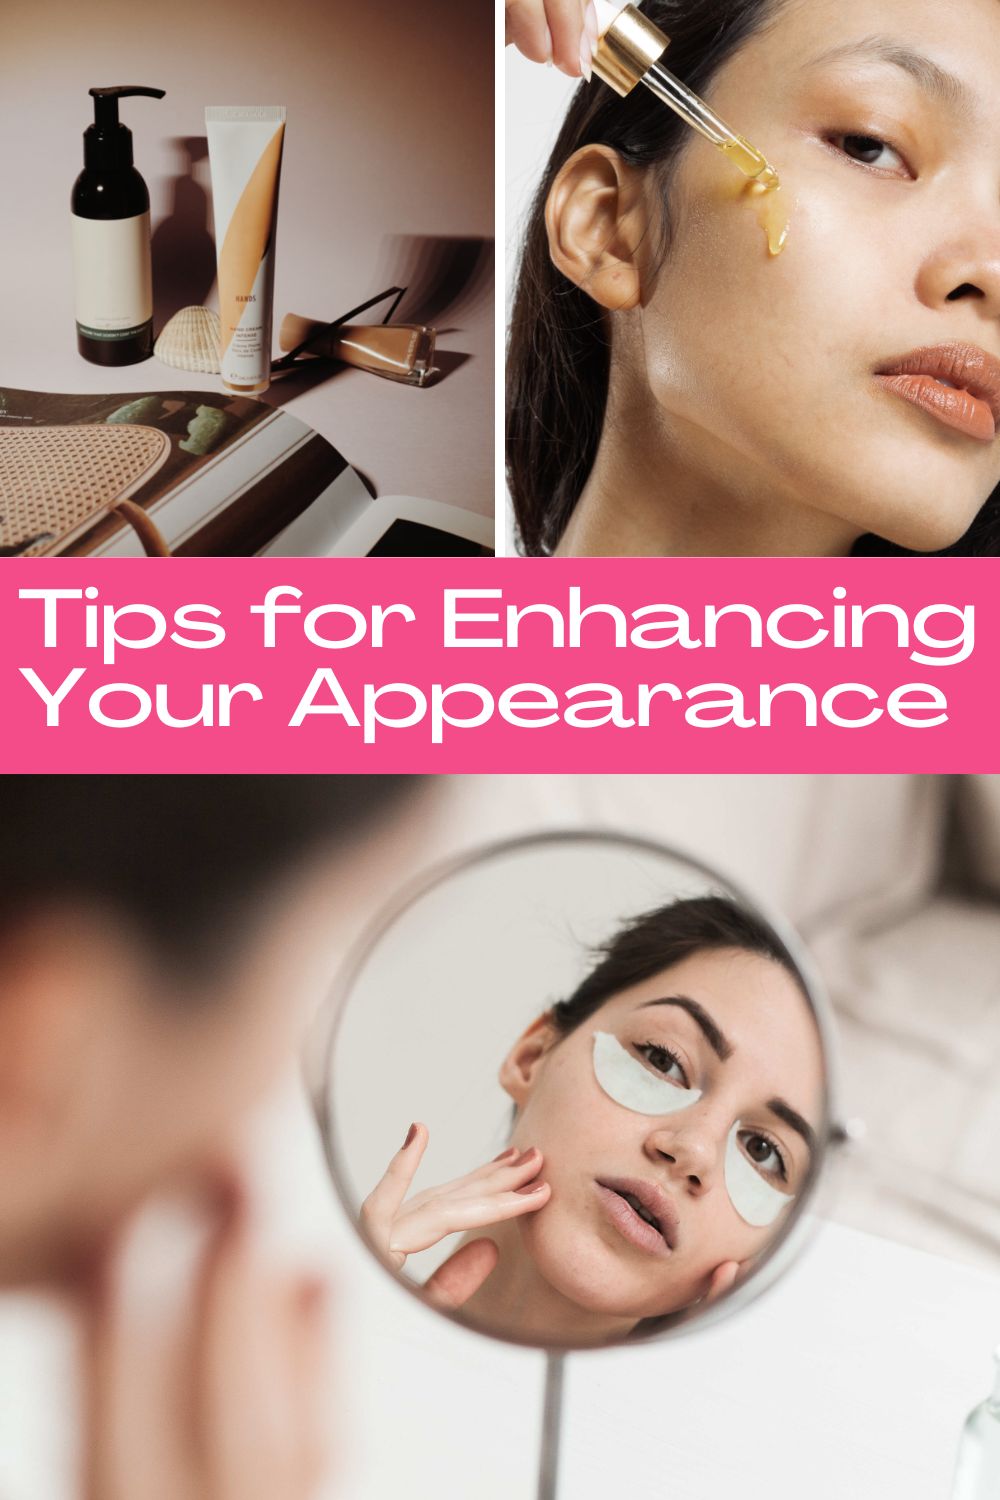 Improving your appearance can improve your self-esteem. Find out what you need to do to improve your overall appearance.